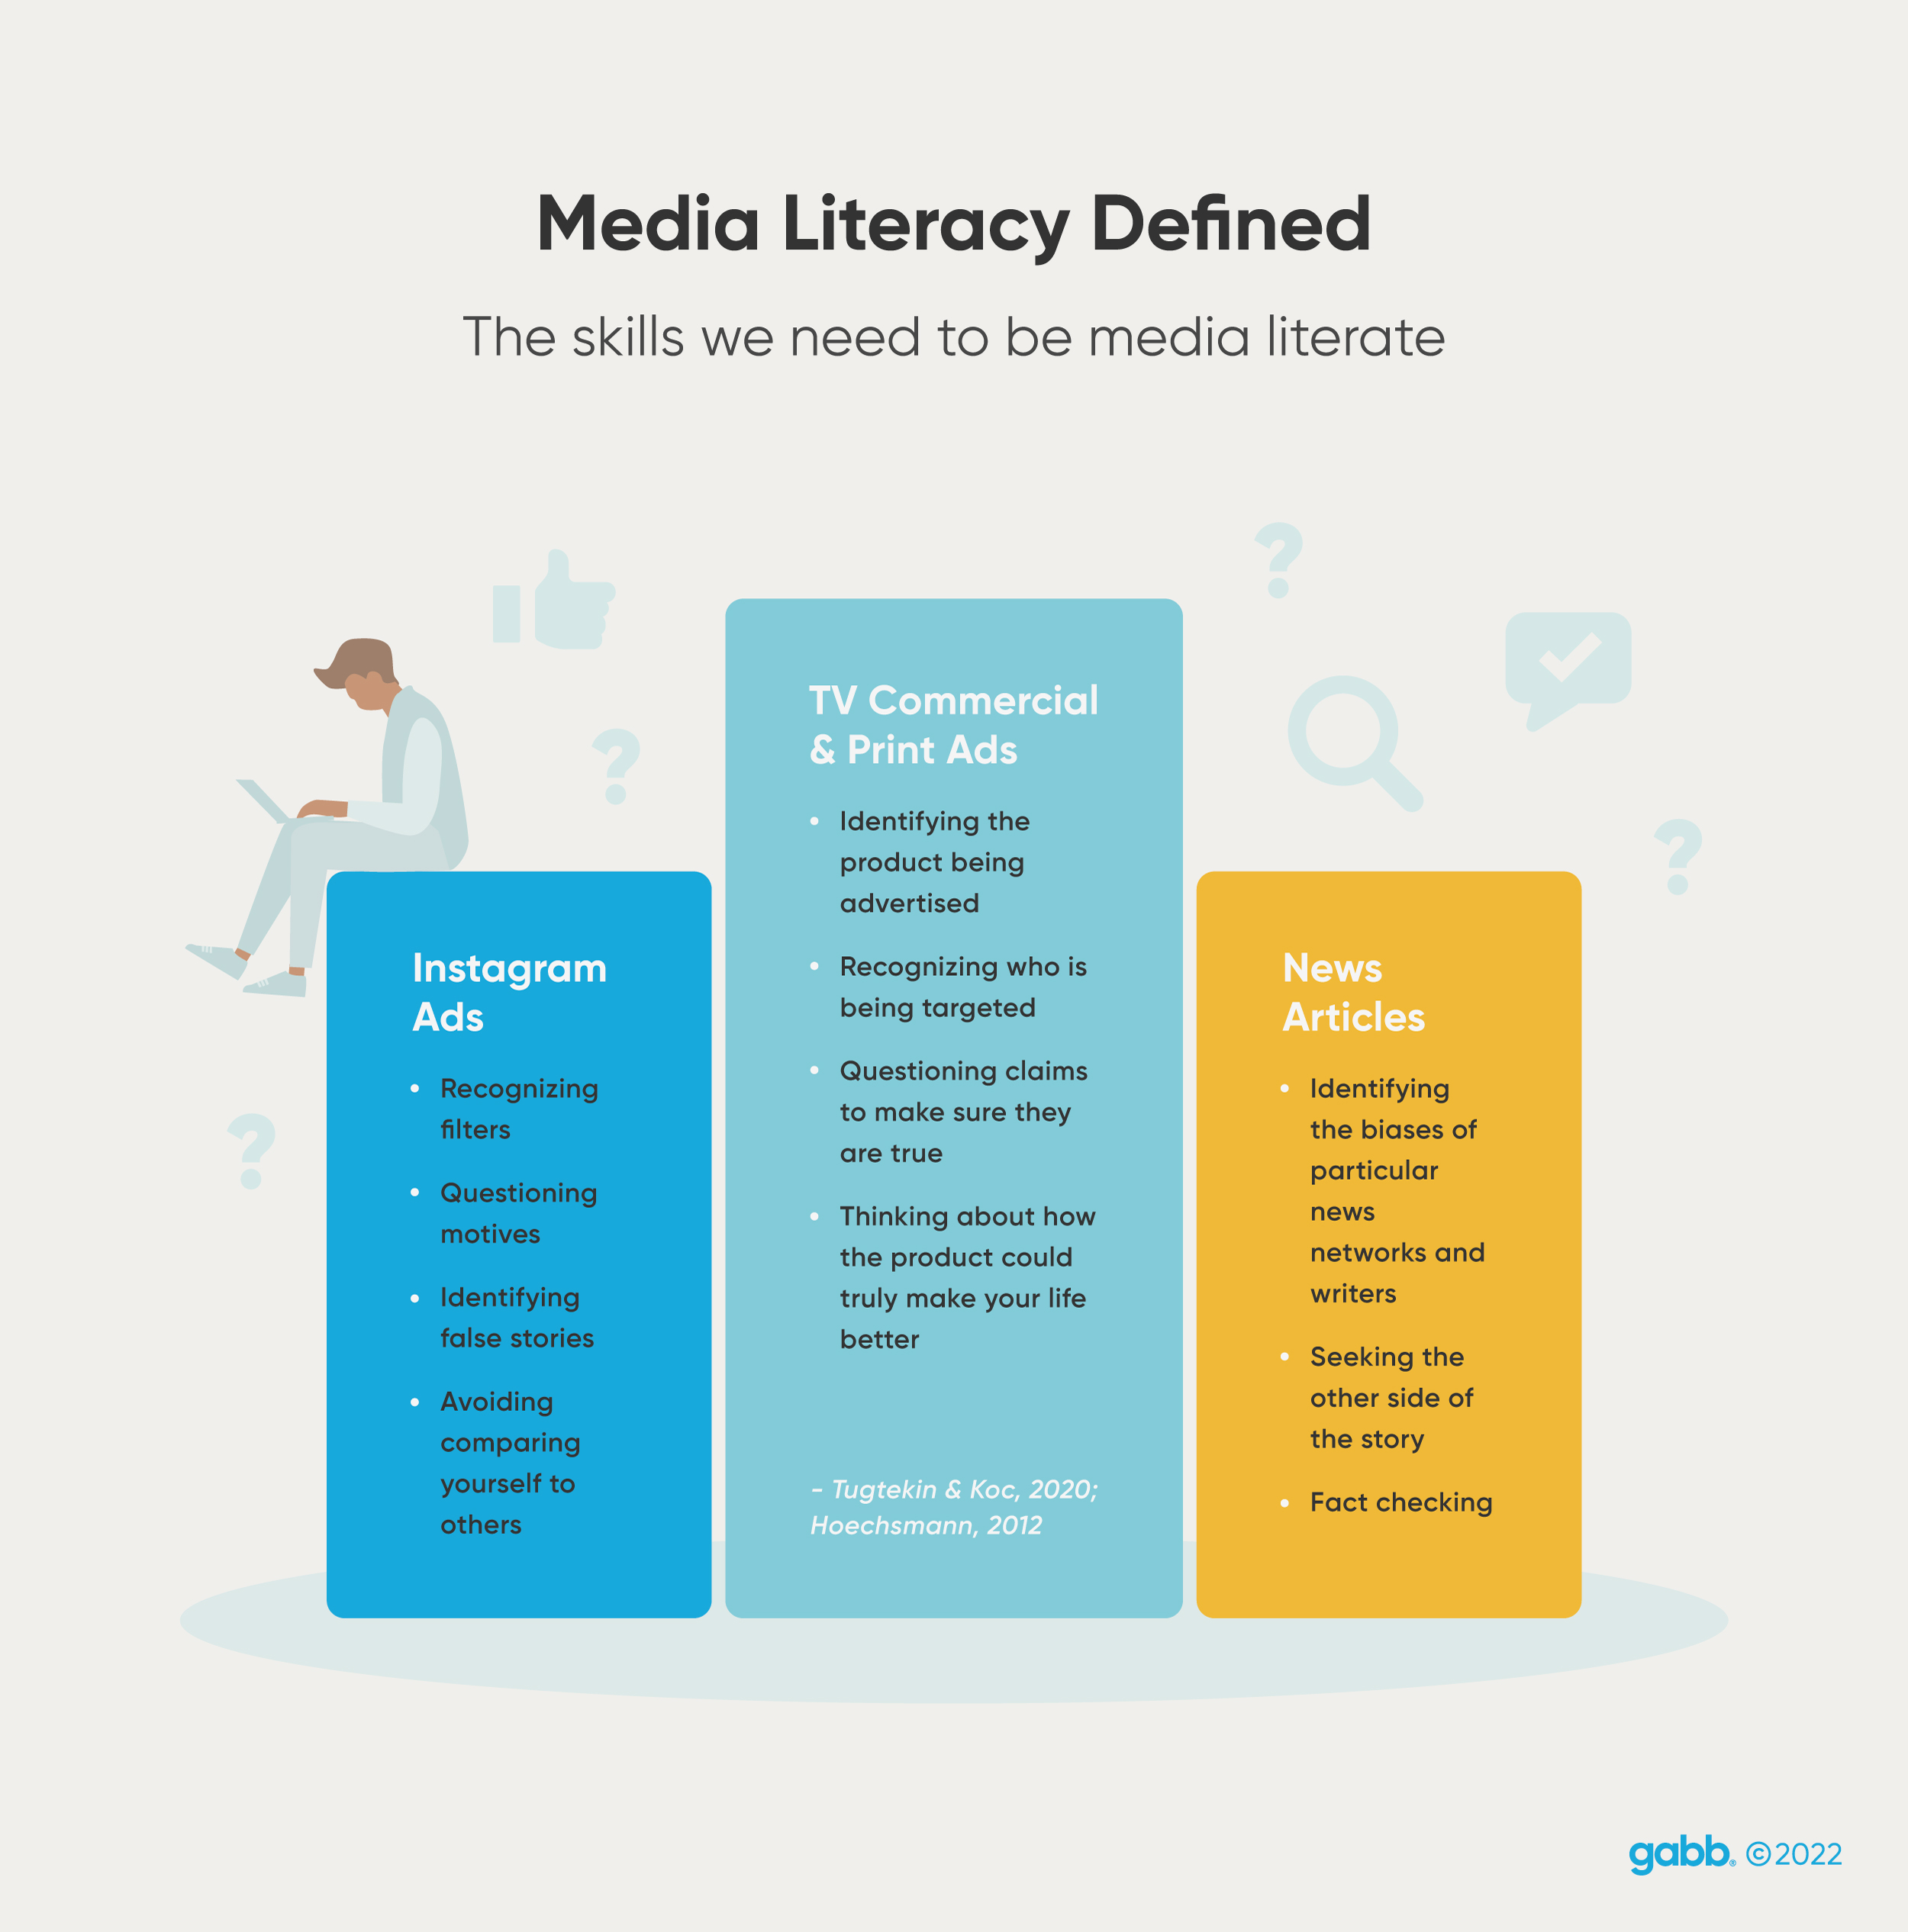 Definition of media literacy and the skills we need to be media literate